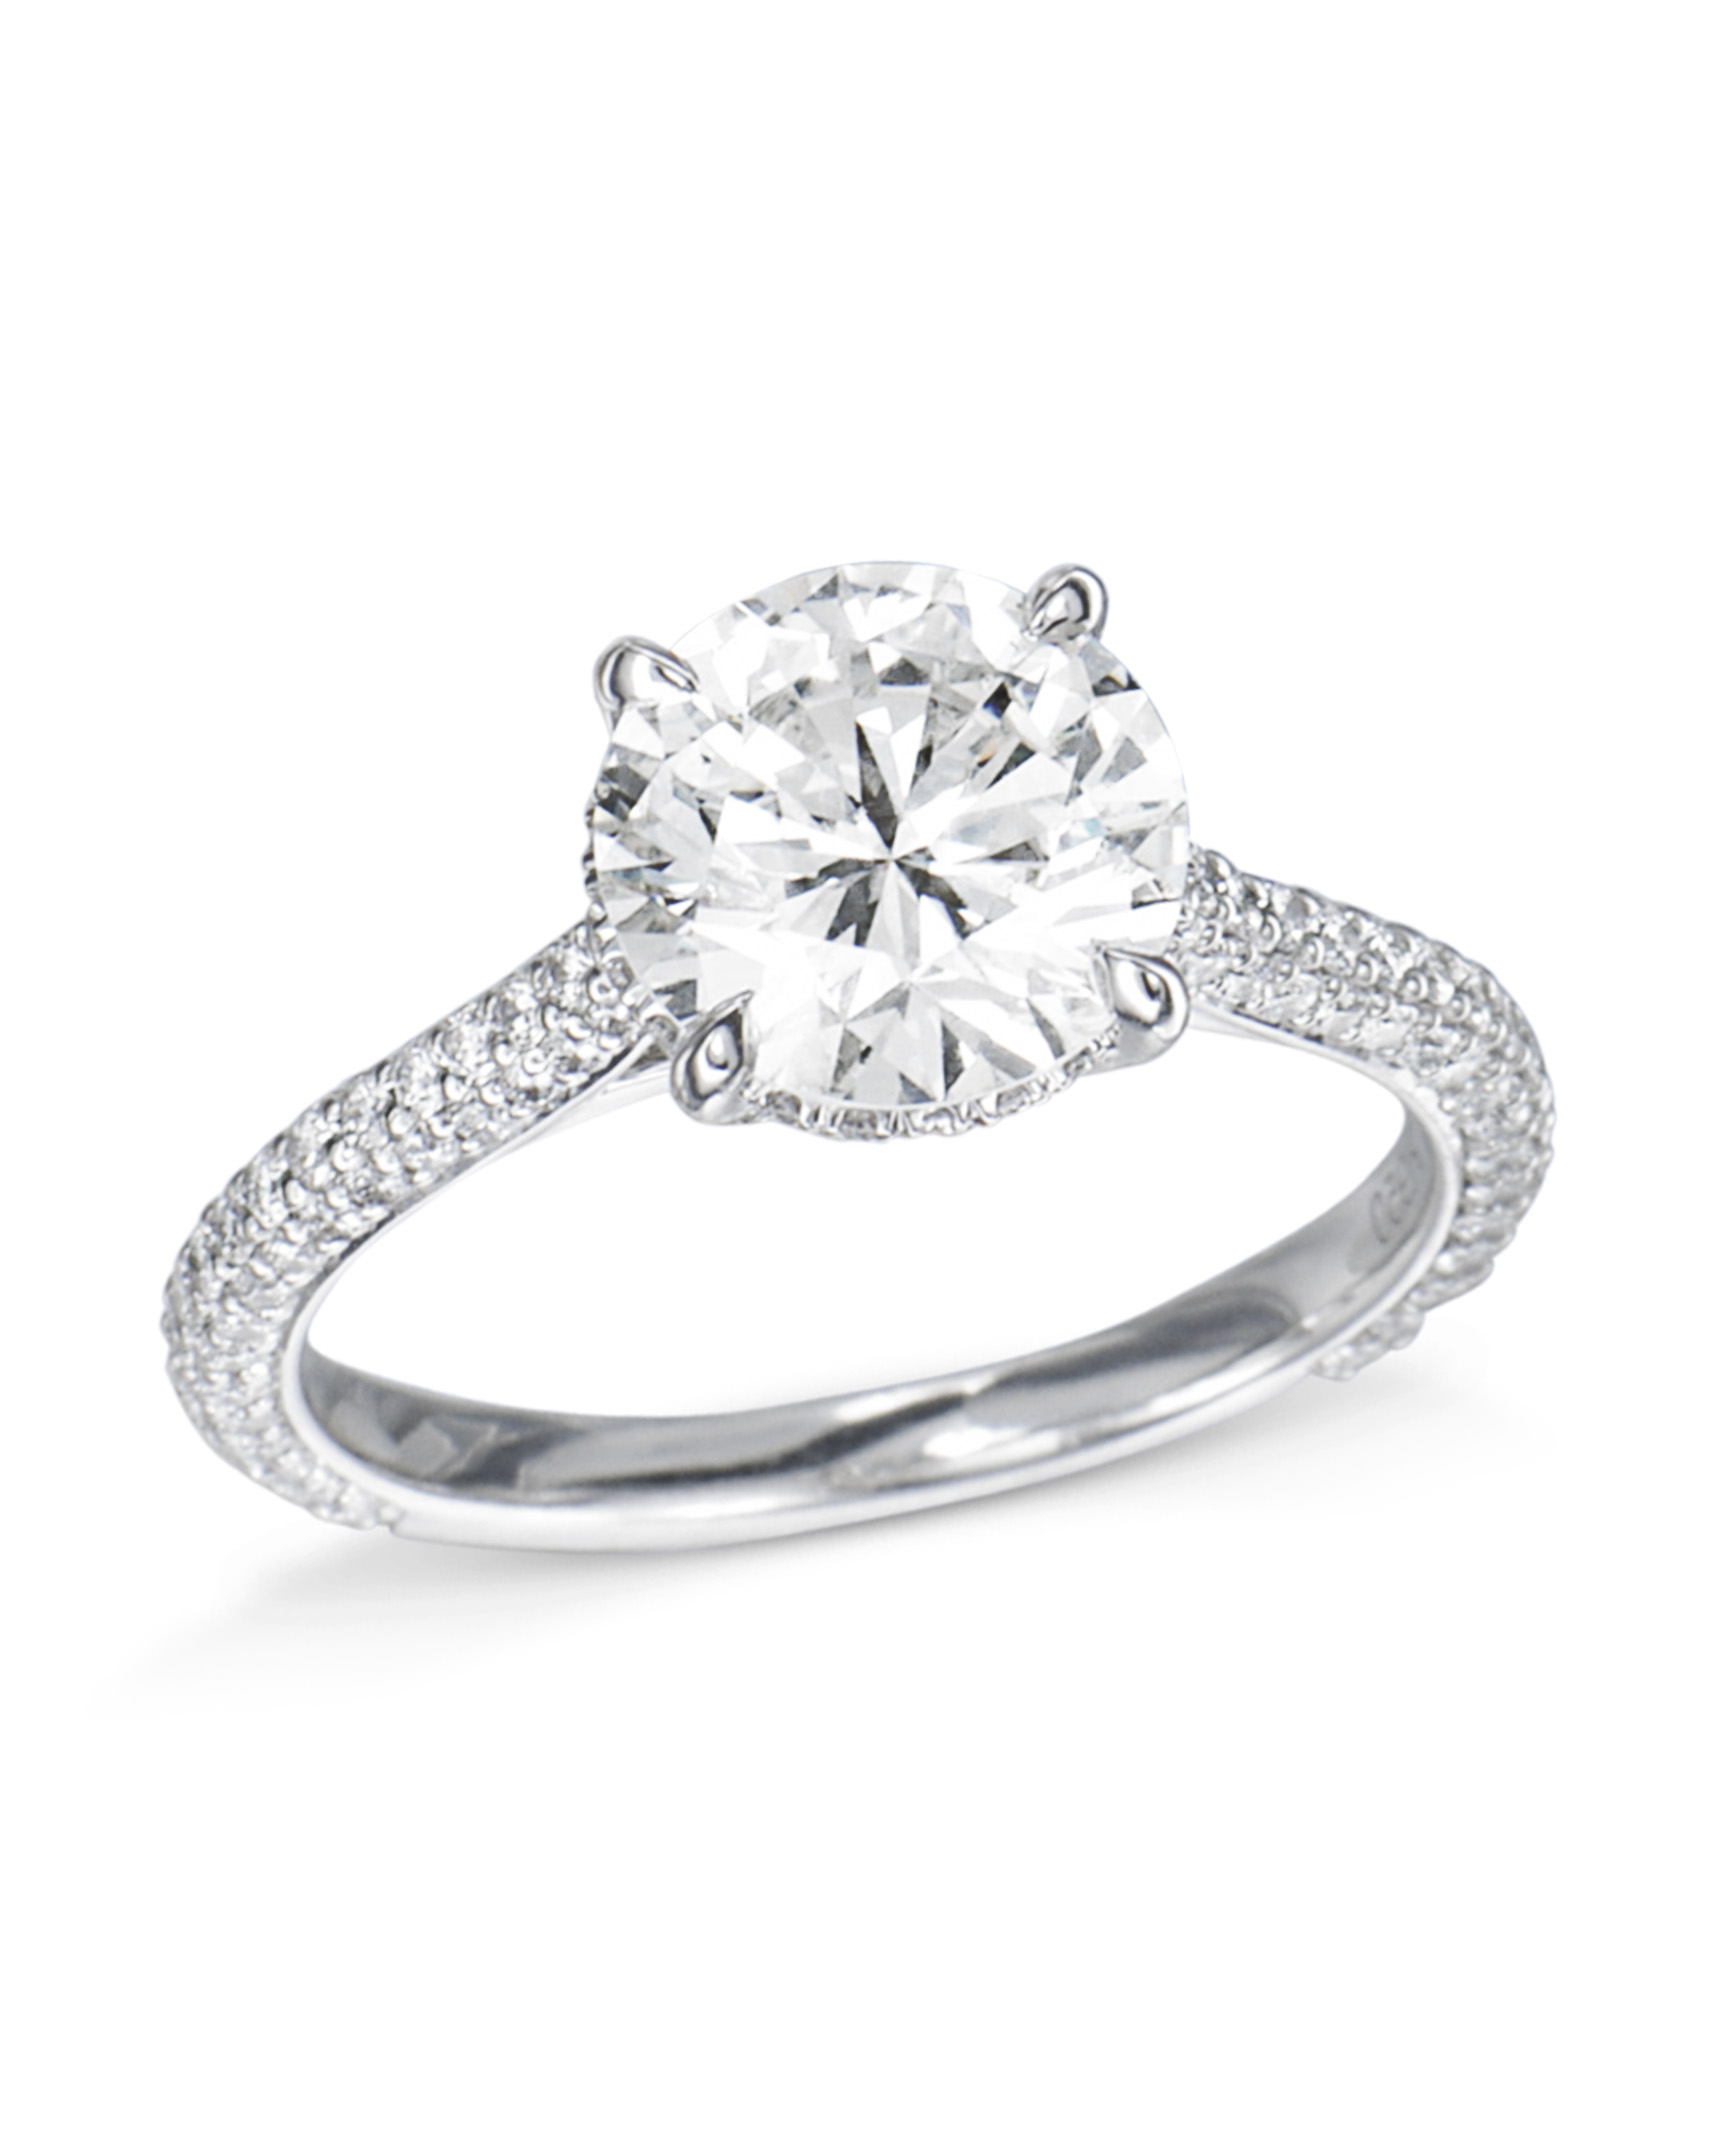 Pave engagement ring setting